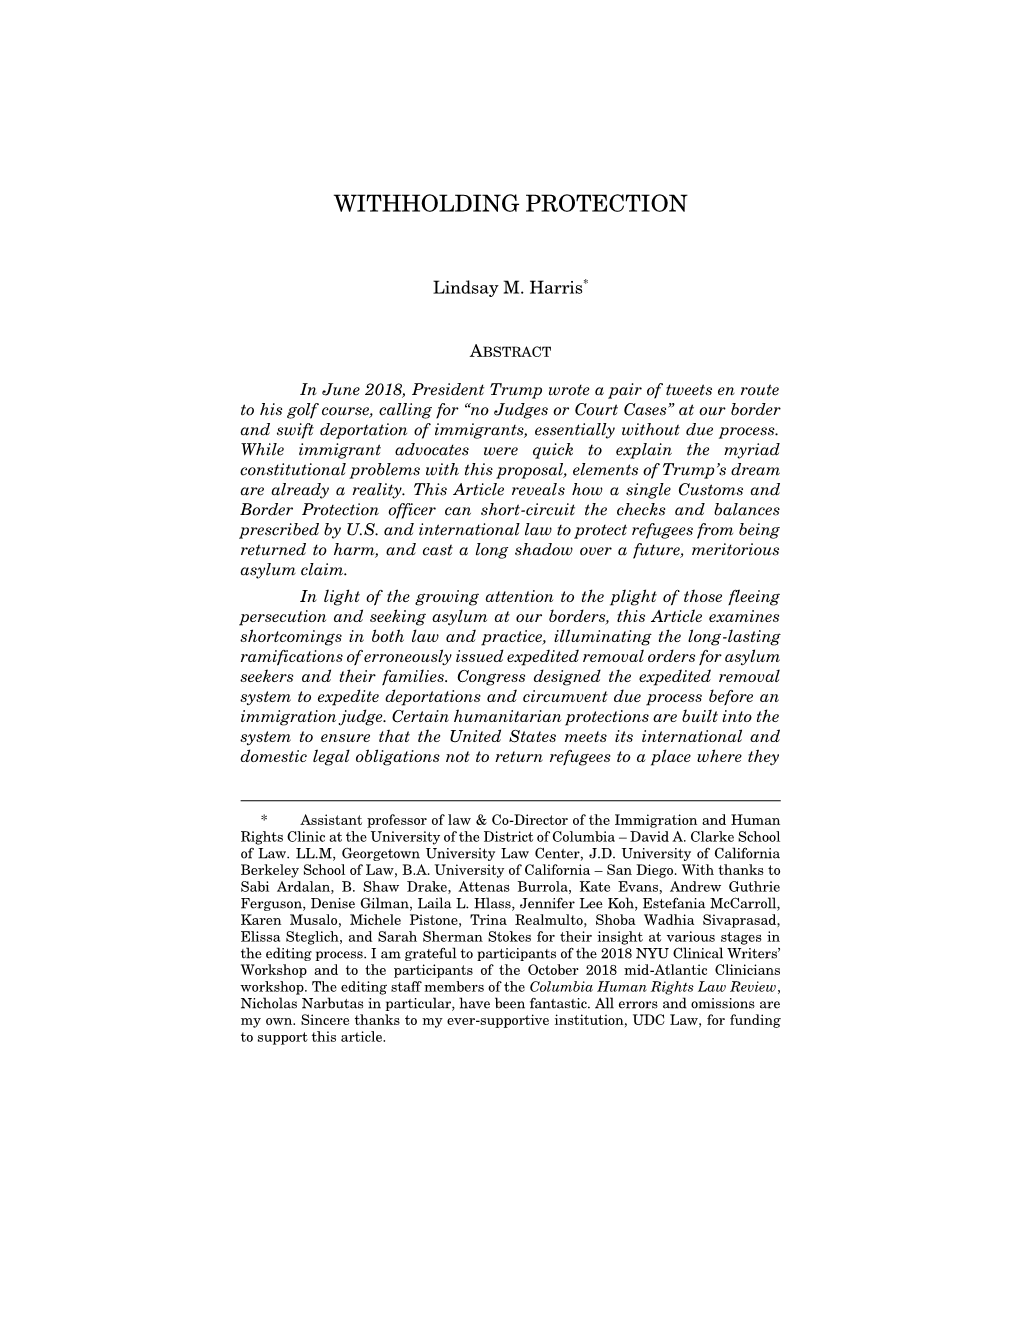 Withholding Protection